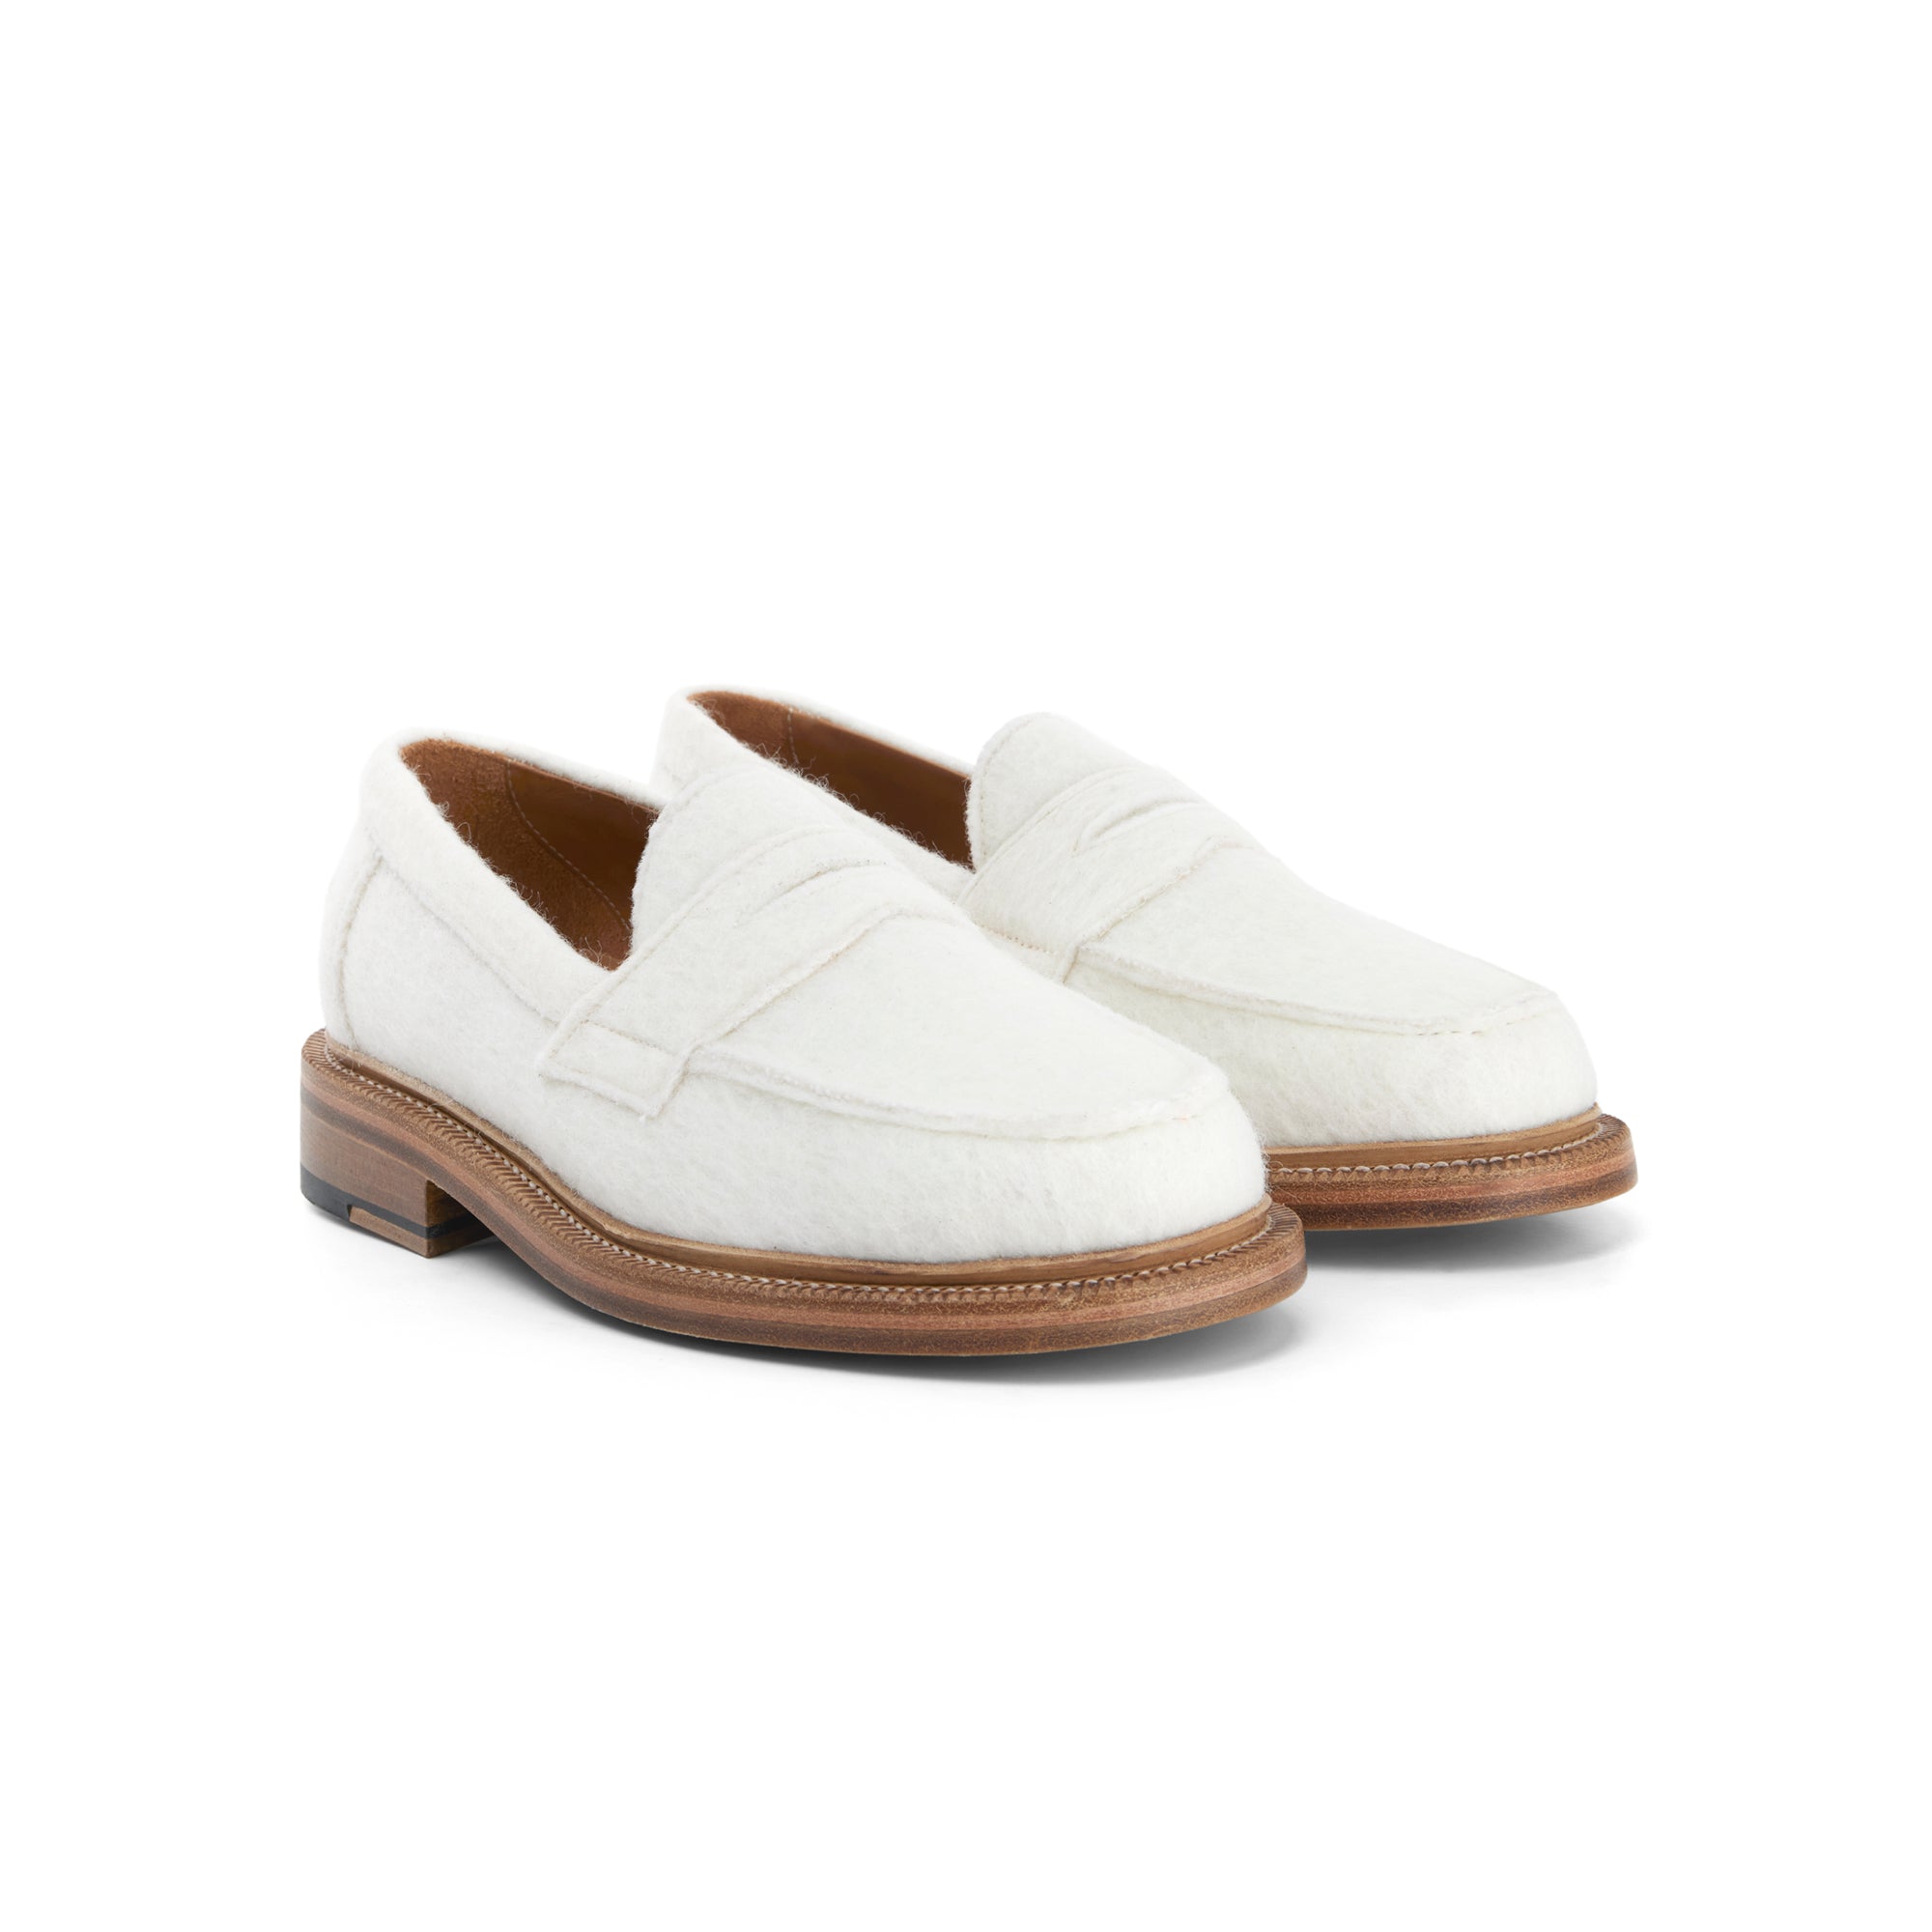 The Ellis Penny Loafer, Exclusively for Palmes